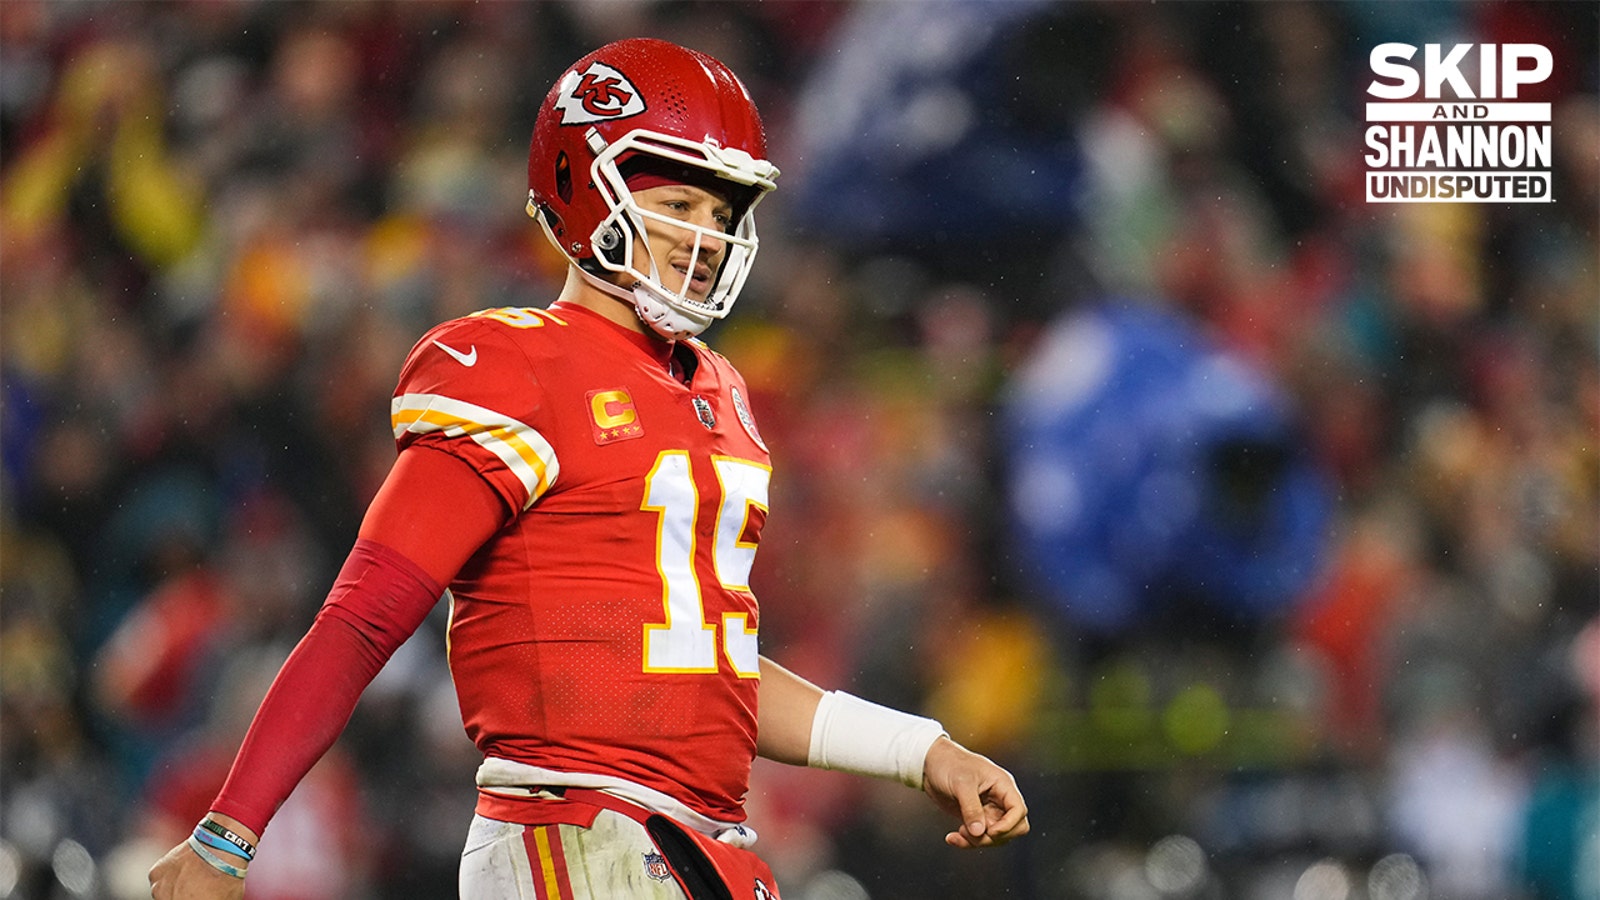 Patrick Mahomes says his ankle is 'feeling good so far' ahead of AFC Championship 